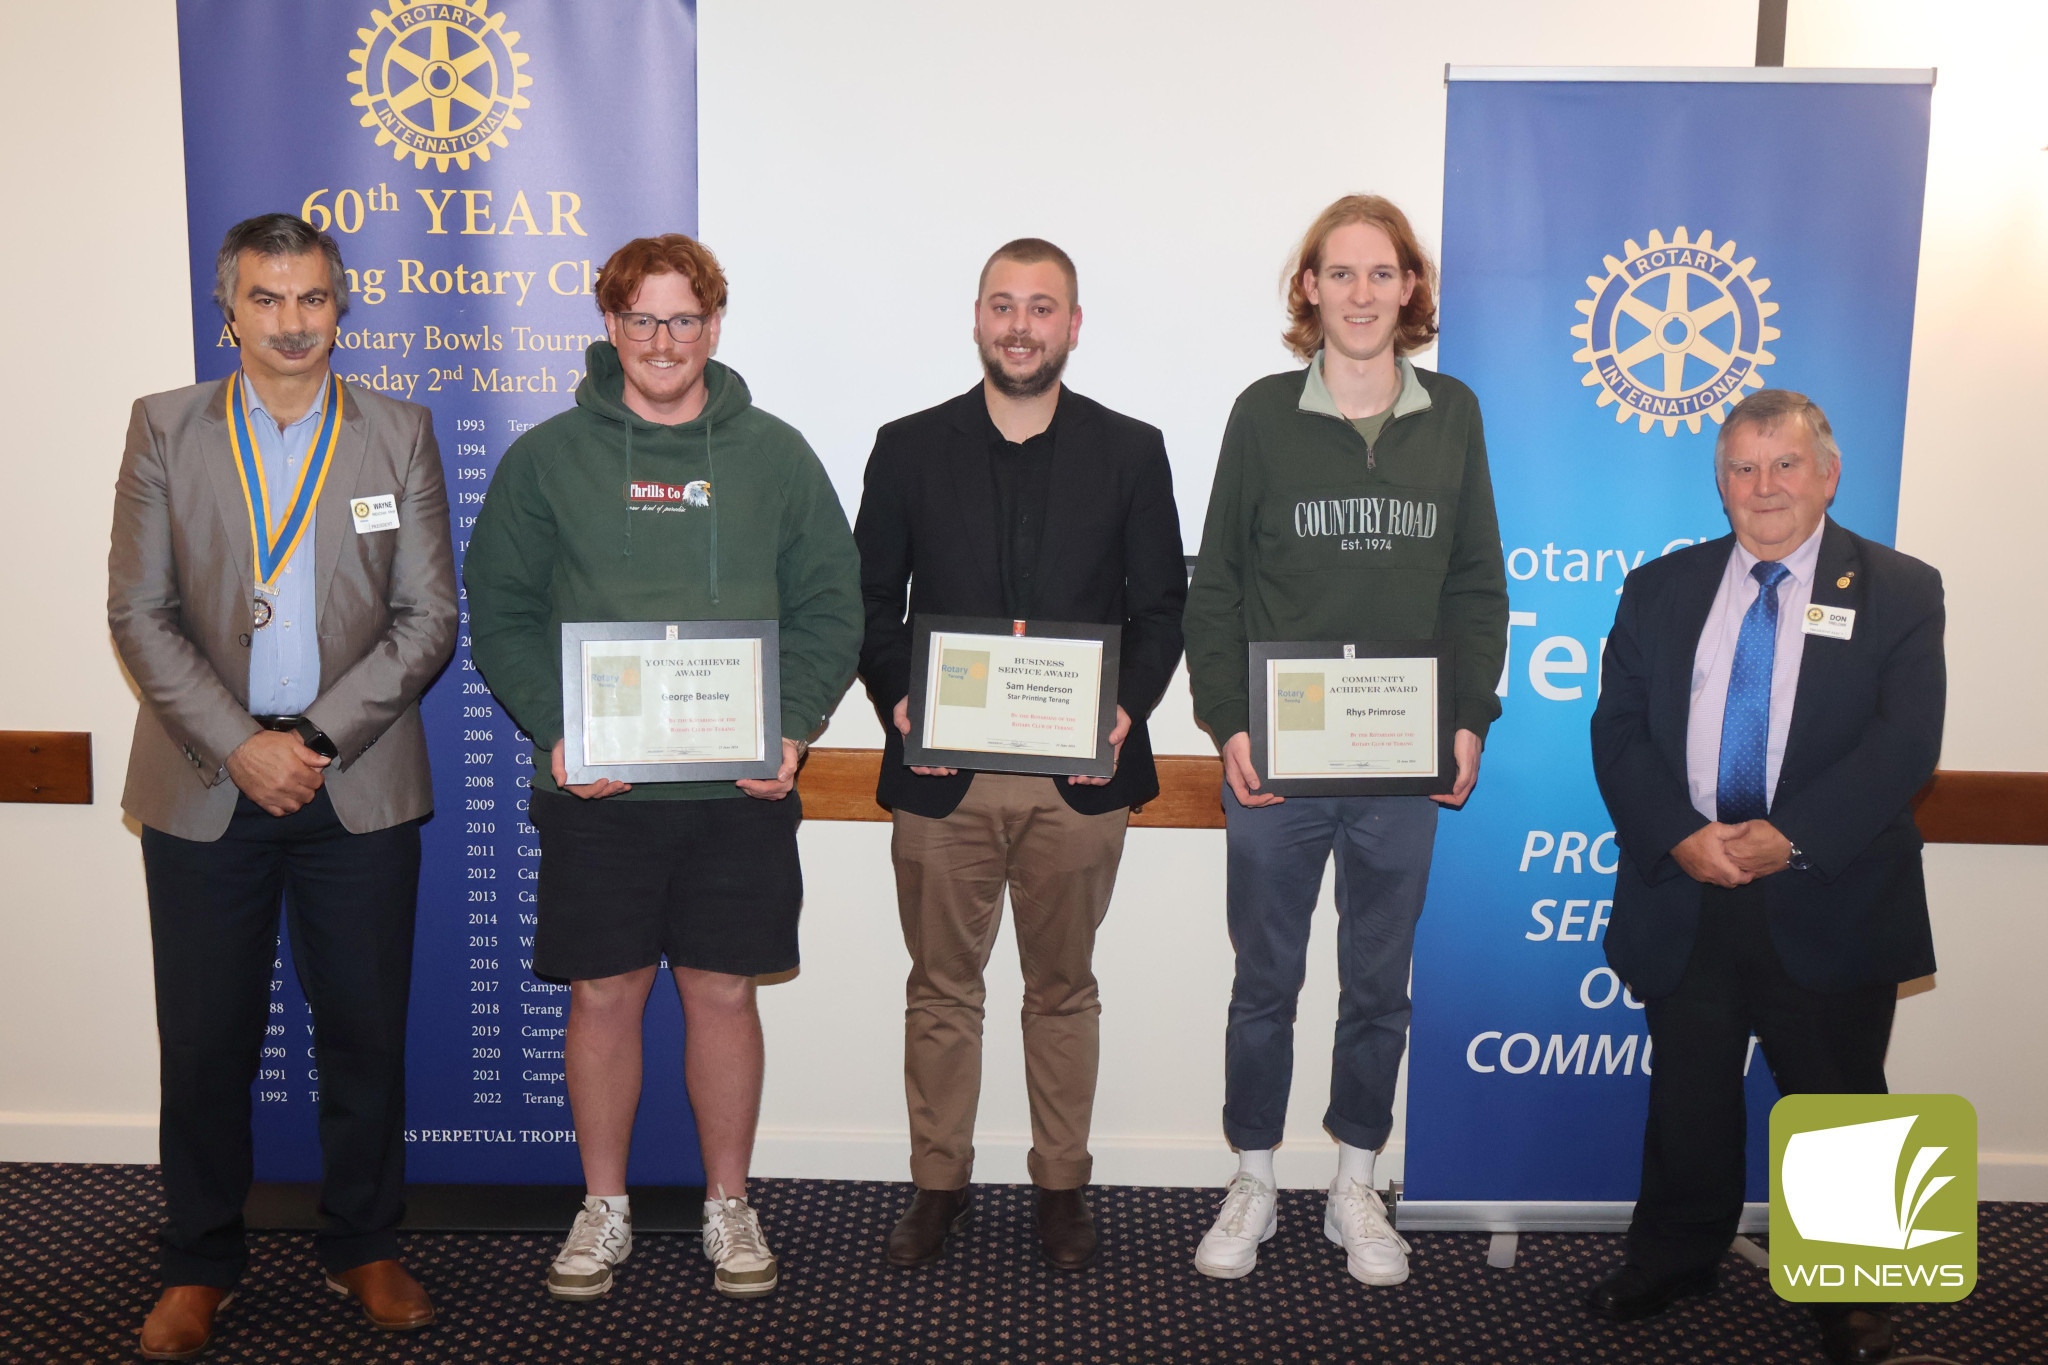 The Rotary Club of Terang reflected on another year of generosity and fellowship at last week’s changeover dinner. The occasion also saw awards given to those making a positive difference in the community.